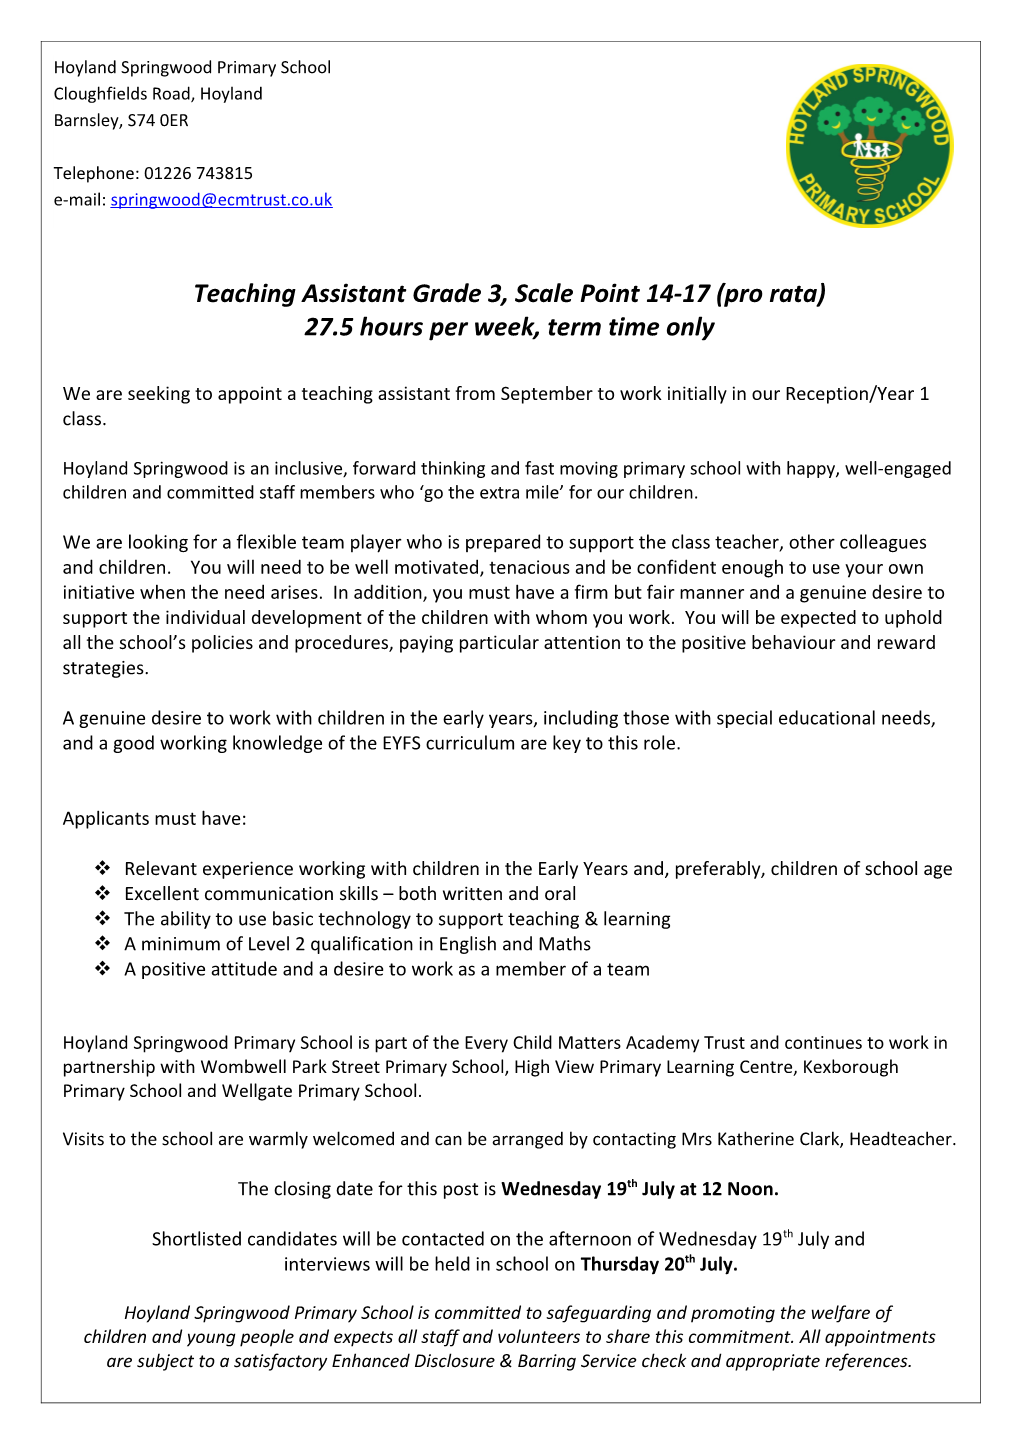 Teaching Assistant Grade 3, Scale Point 14-17 (Pro Rata)